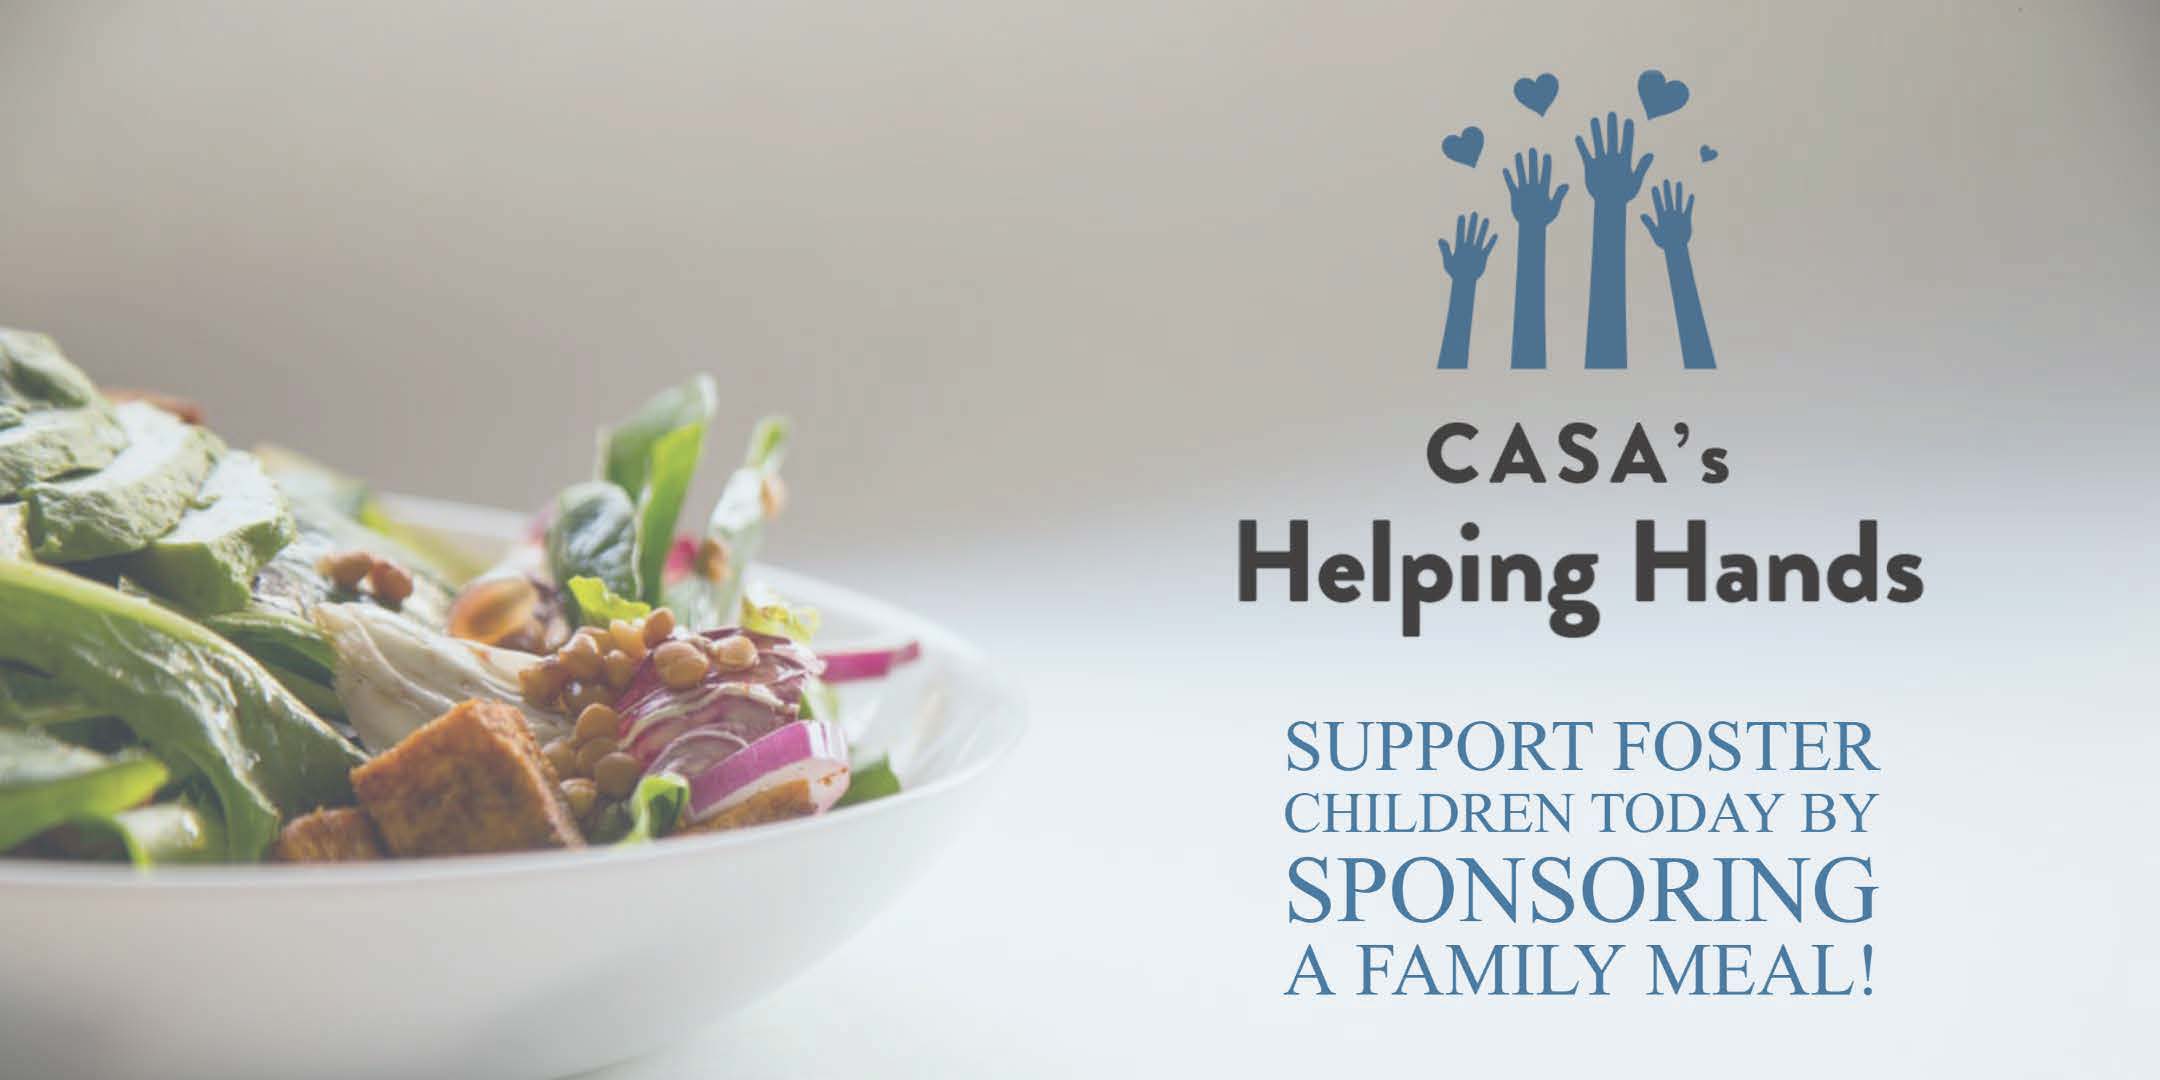 Support foster children today by sponsoring a meal!